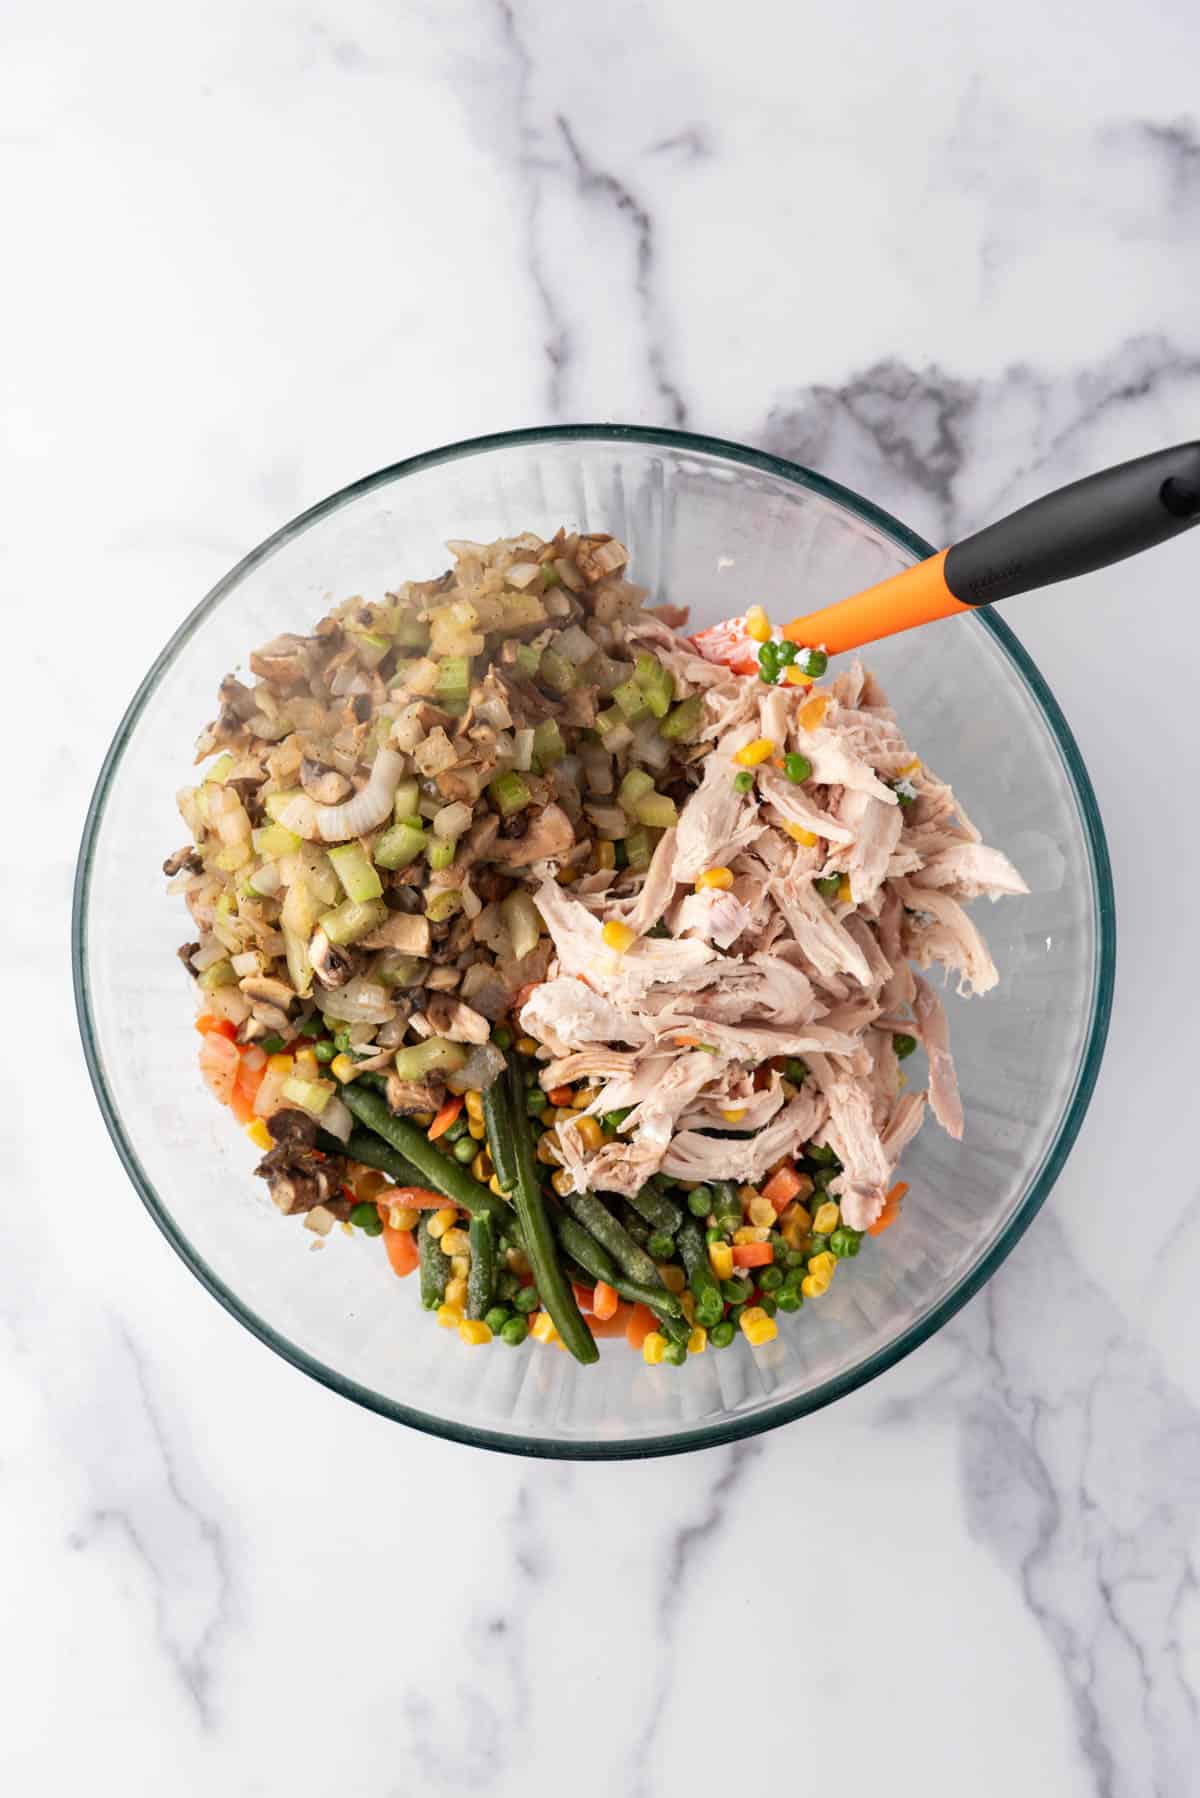 Combining shredded rotisserie chicken and vegetables in a large mixing bowl.